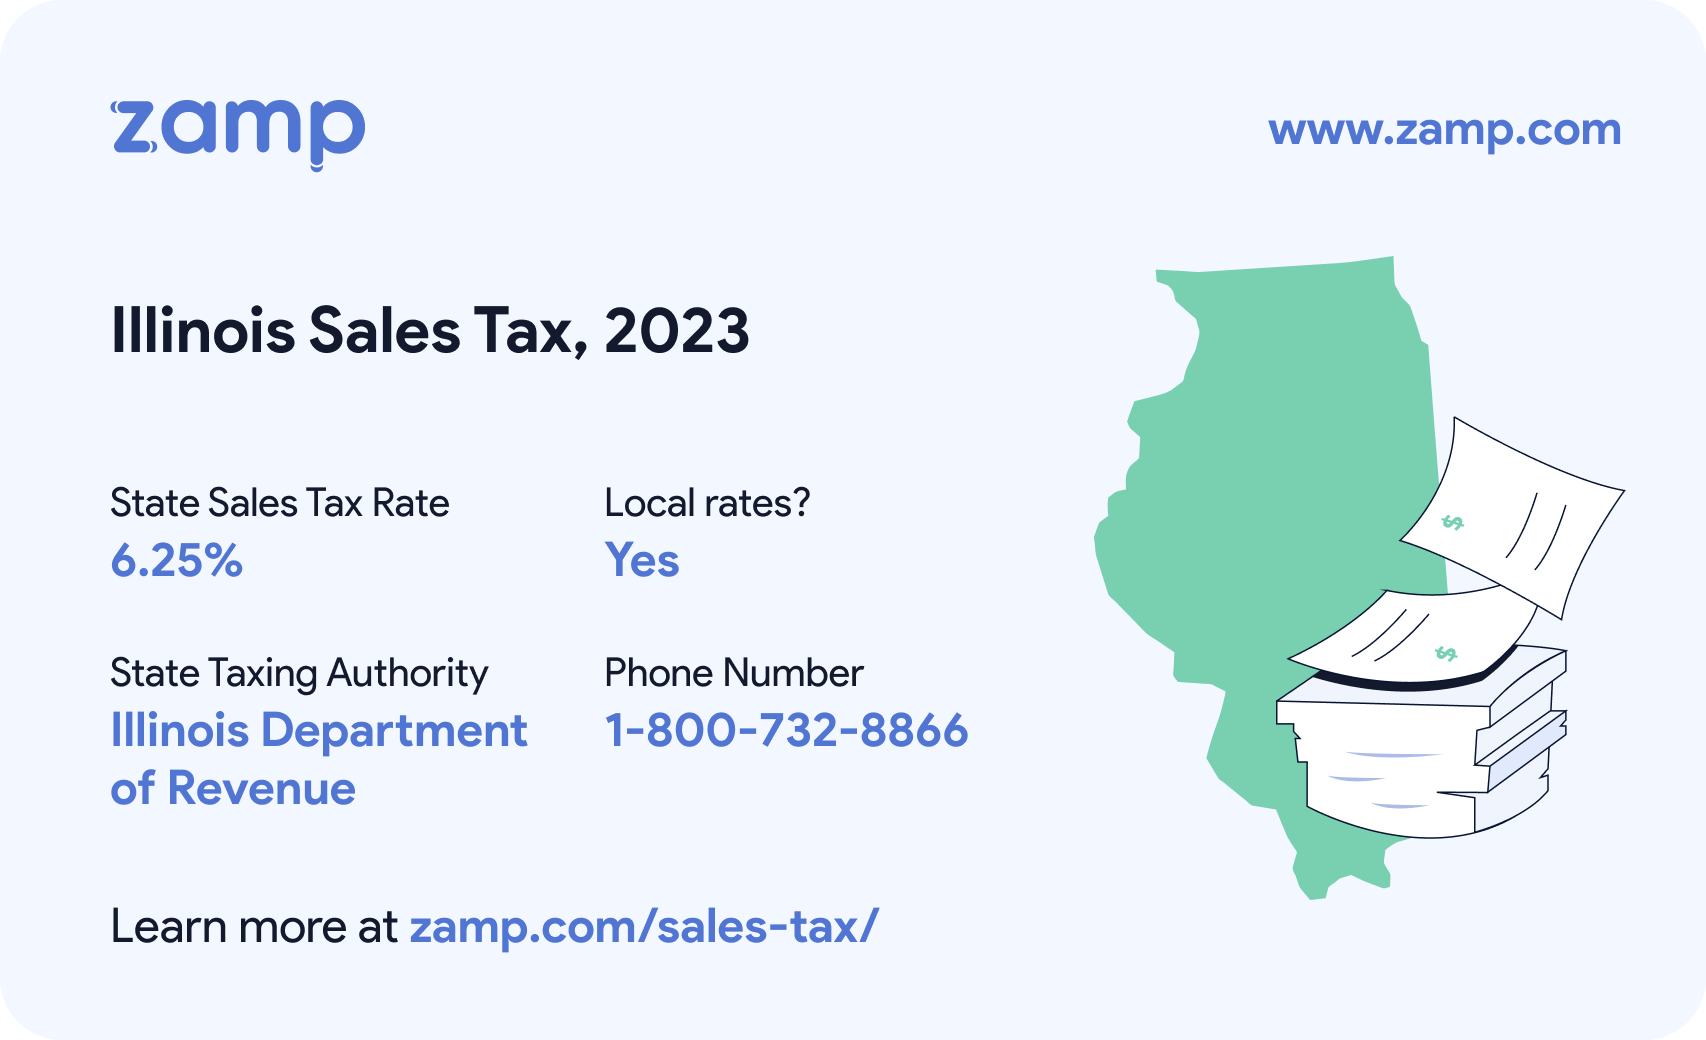 Illinois basic sales tax info for 2023 - State sales tax rate: 6.25%, Local rates? Yes; State Taxing Authority: Illinois Department of Revenue; and phone number 1-800-732-8866